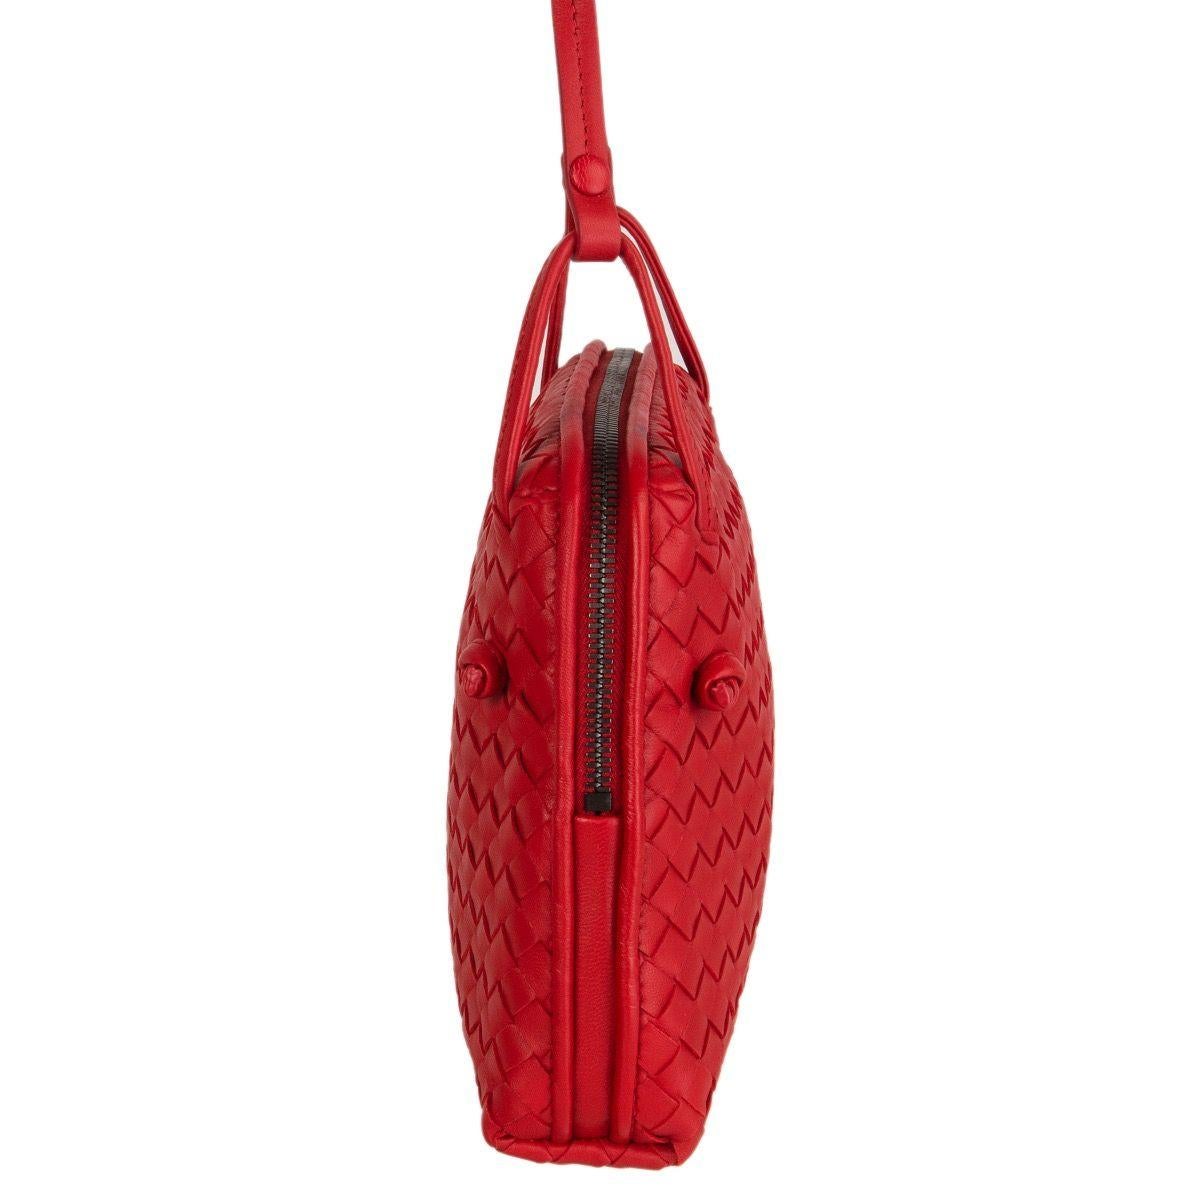 Bottega Veneta 'Nodini' cross-body in red woven nappa leather. Opens with a two-way zipper on top. Lined in dark taupe suede with one open pocket against the front and a zipper pocket against the back. Has an adjustable shoulder strap. Comes with a